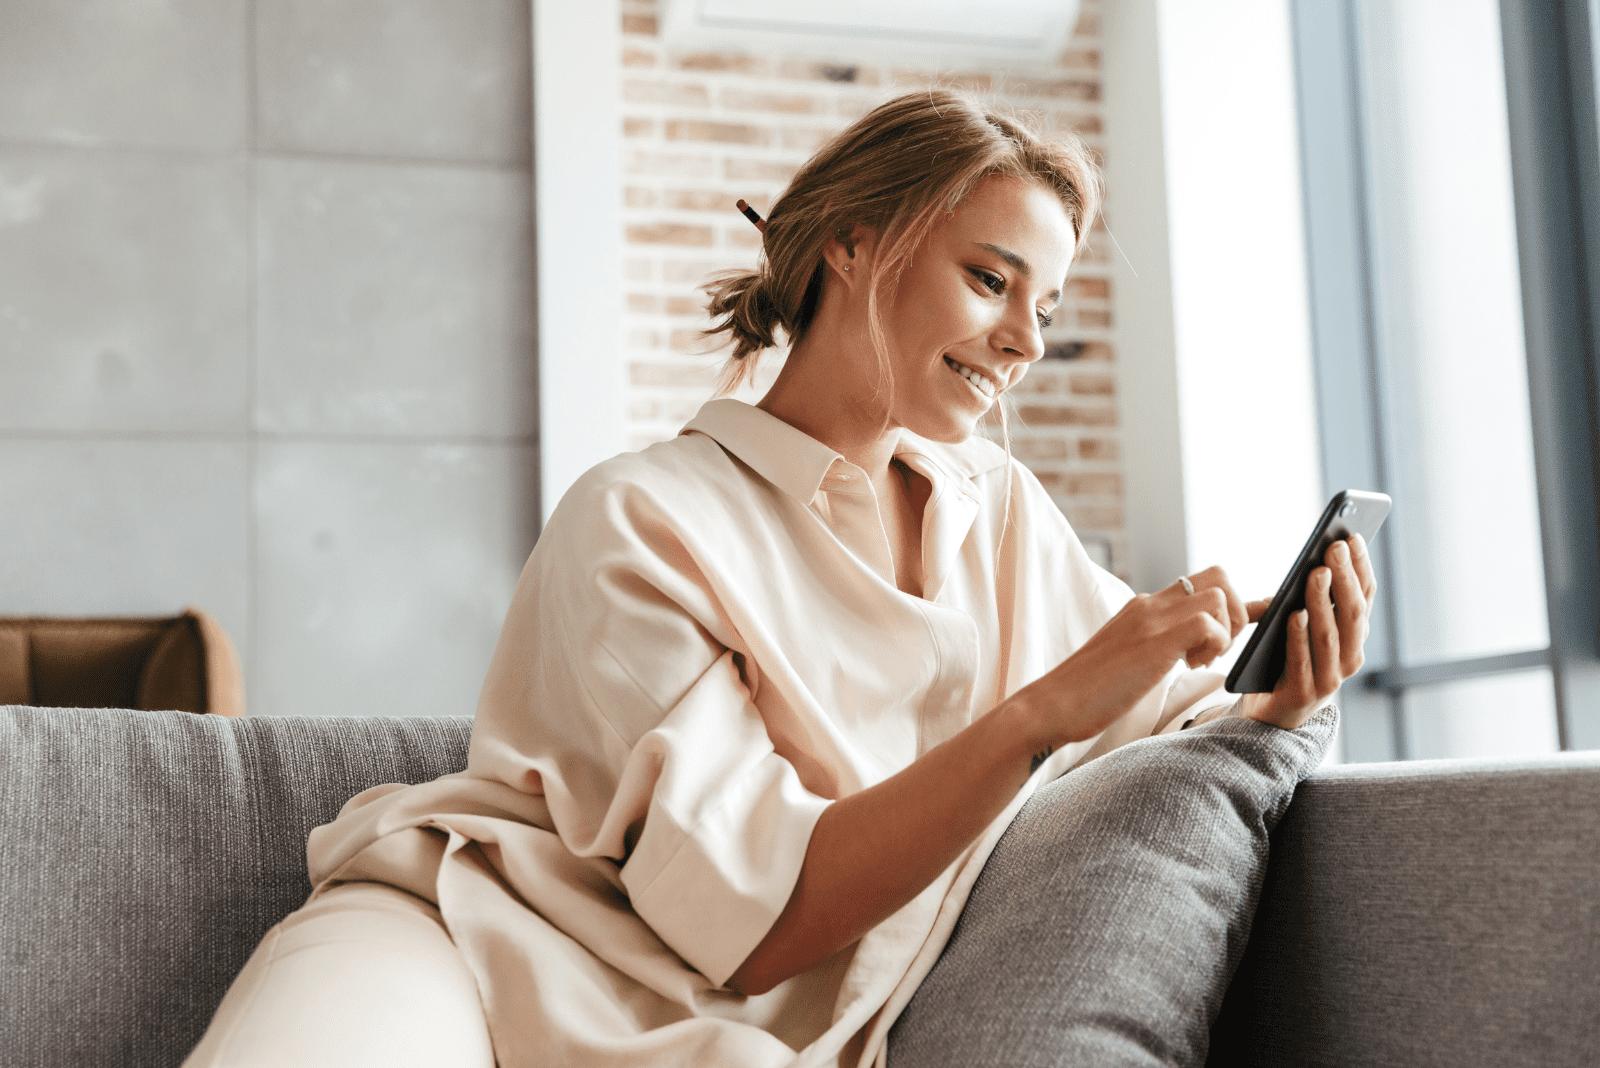 beautiful woman leaning on the couch and typing on a mobile phone